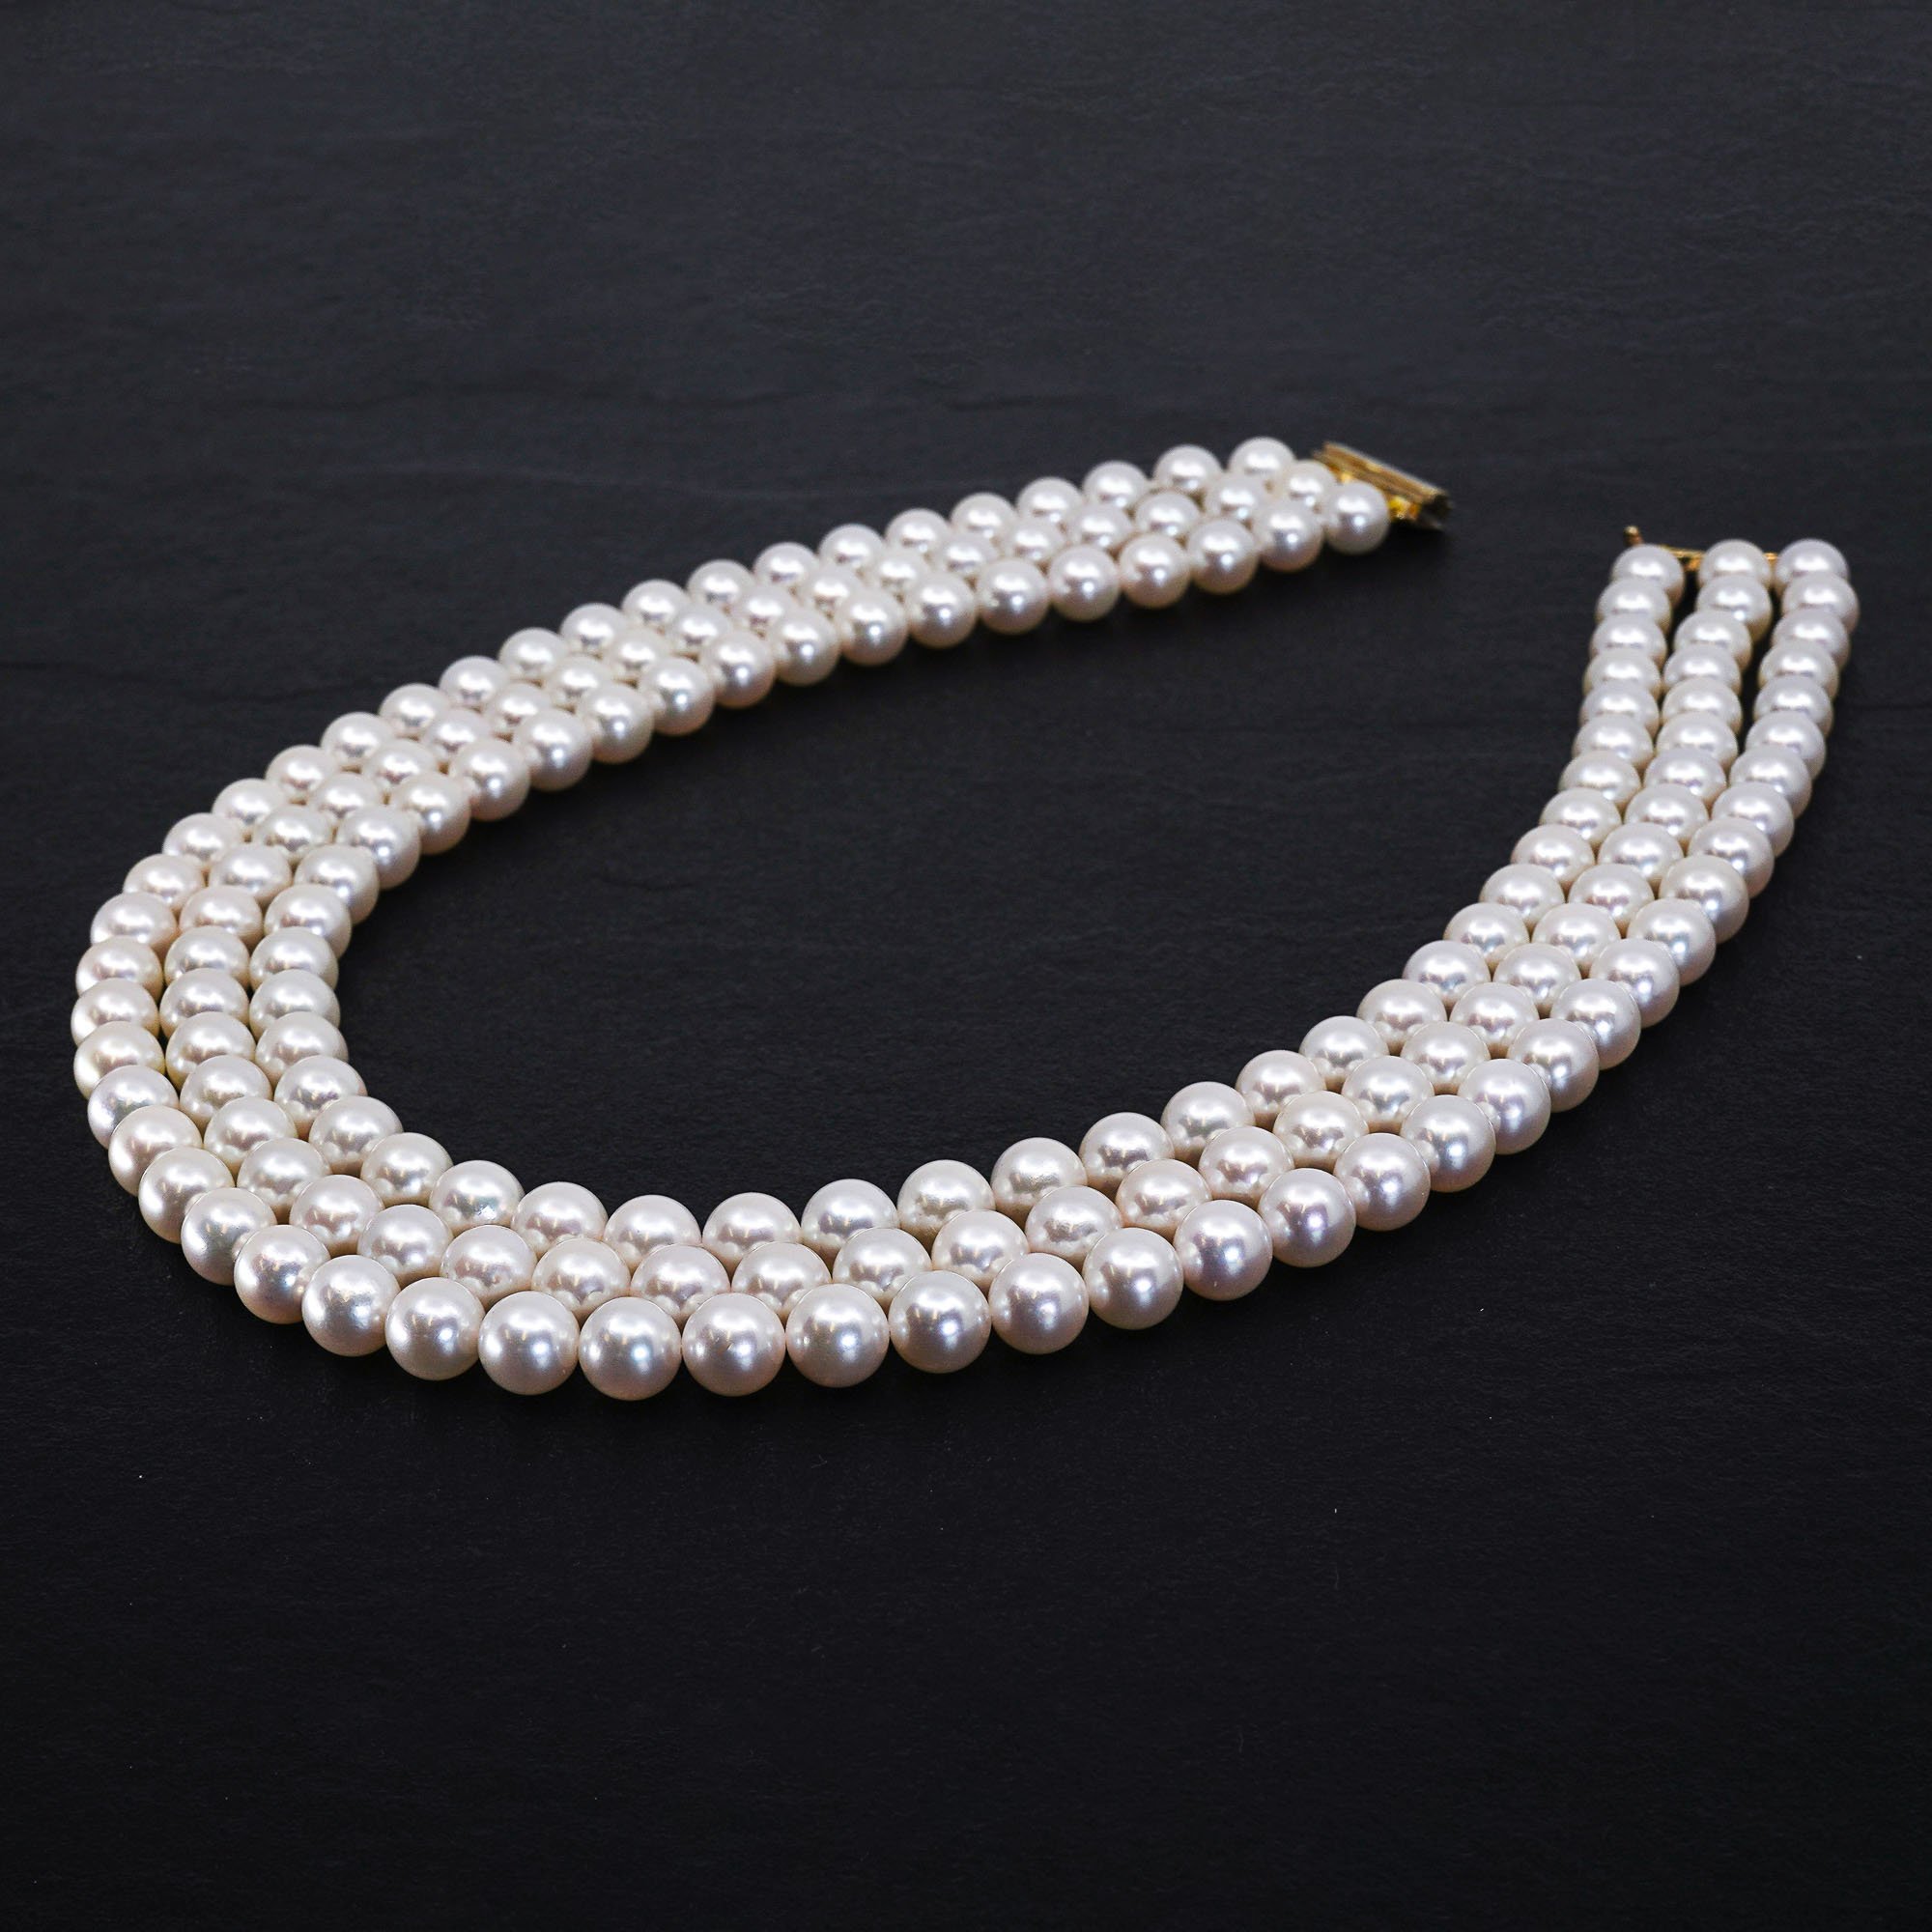 What does pearl necklace mean?